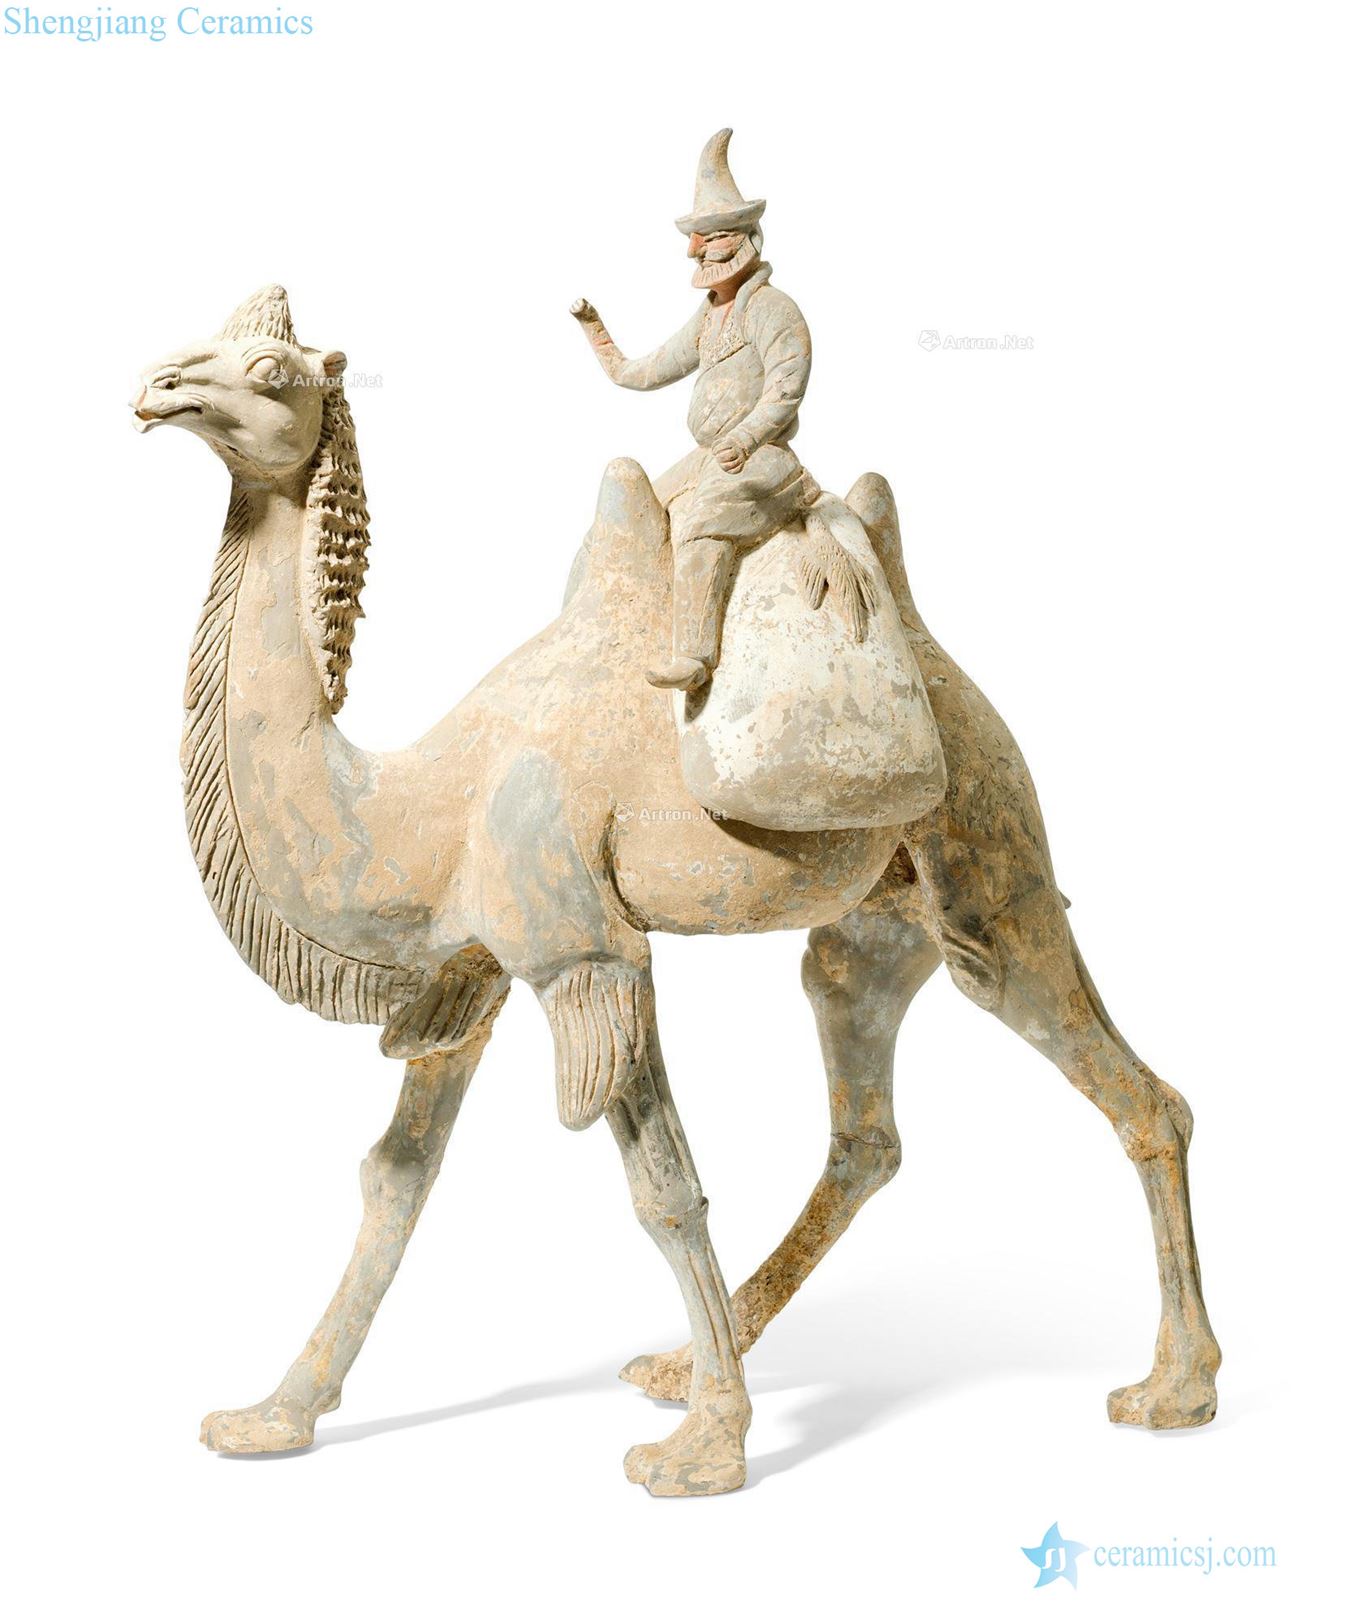 Tang about 7 century conference semifinals terracotta figures camel coloured drawing or pattern